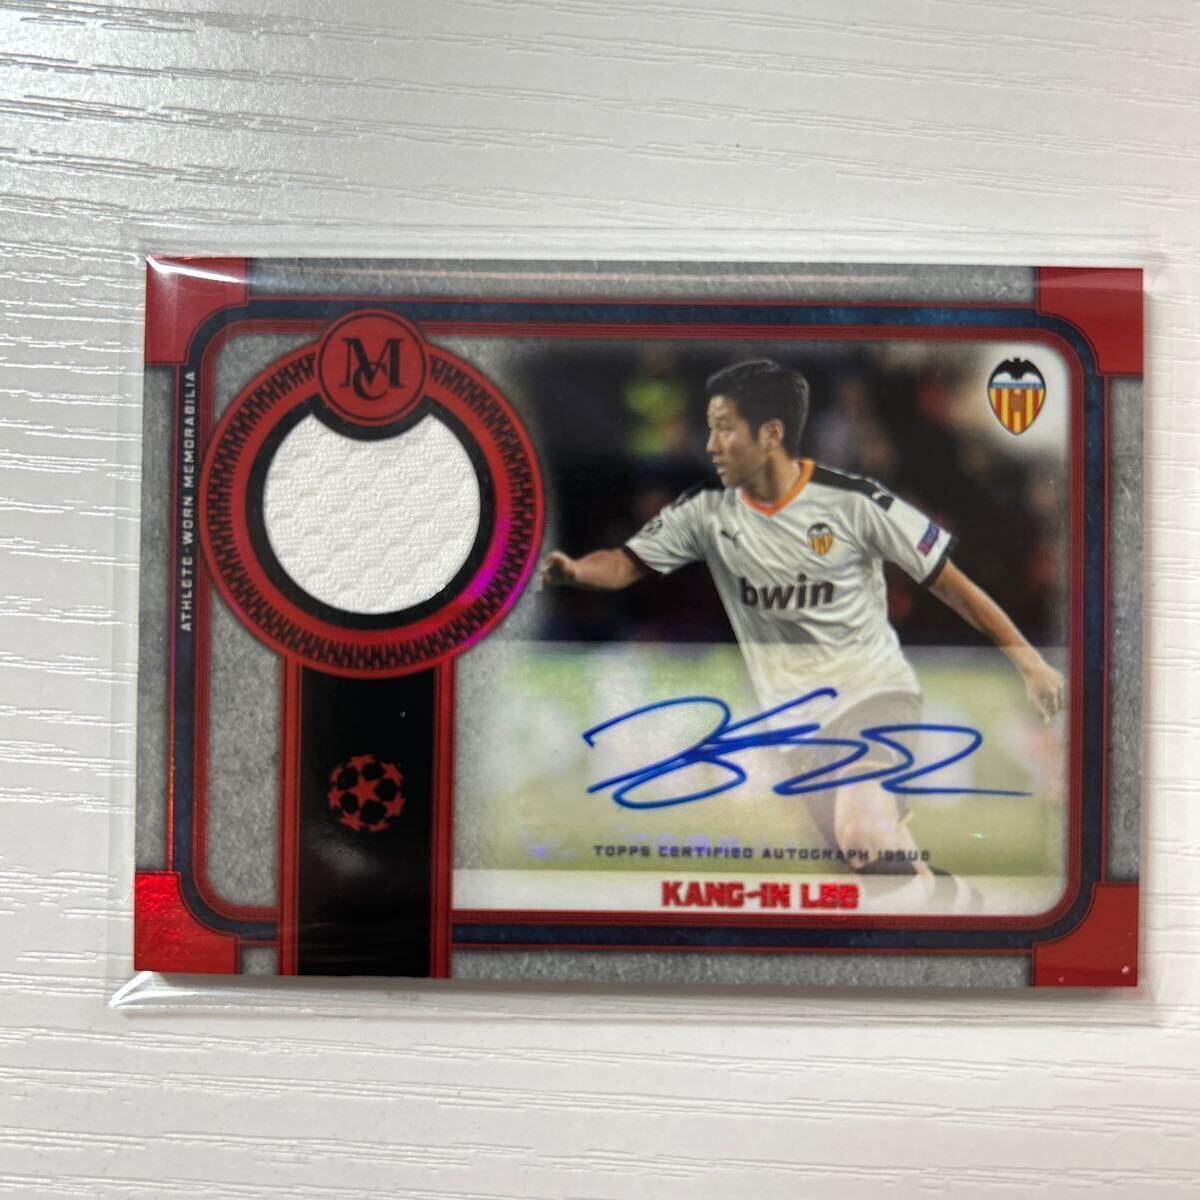 2019 20 Topps Museum Collection Champions League Lee Kang In jersey auto 25